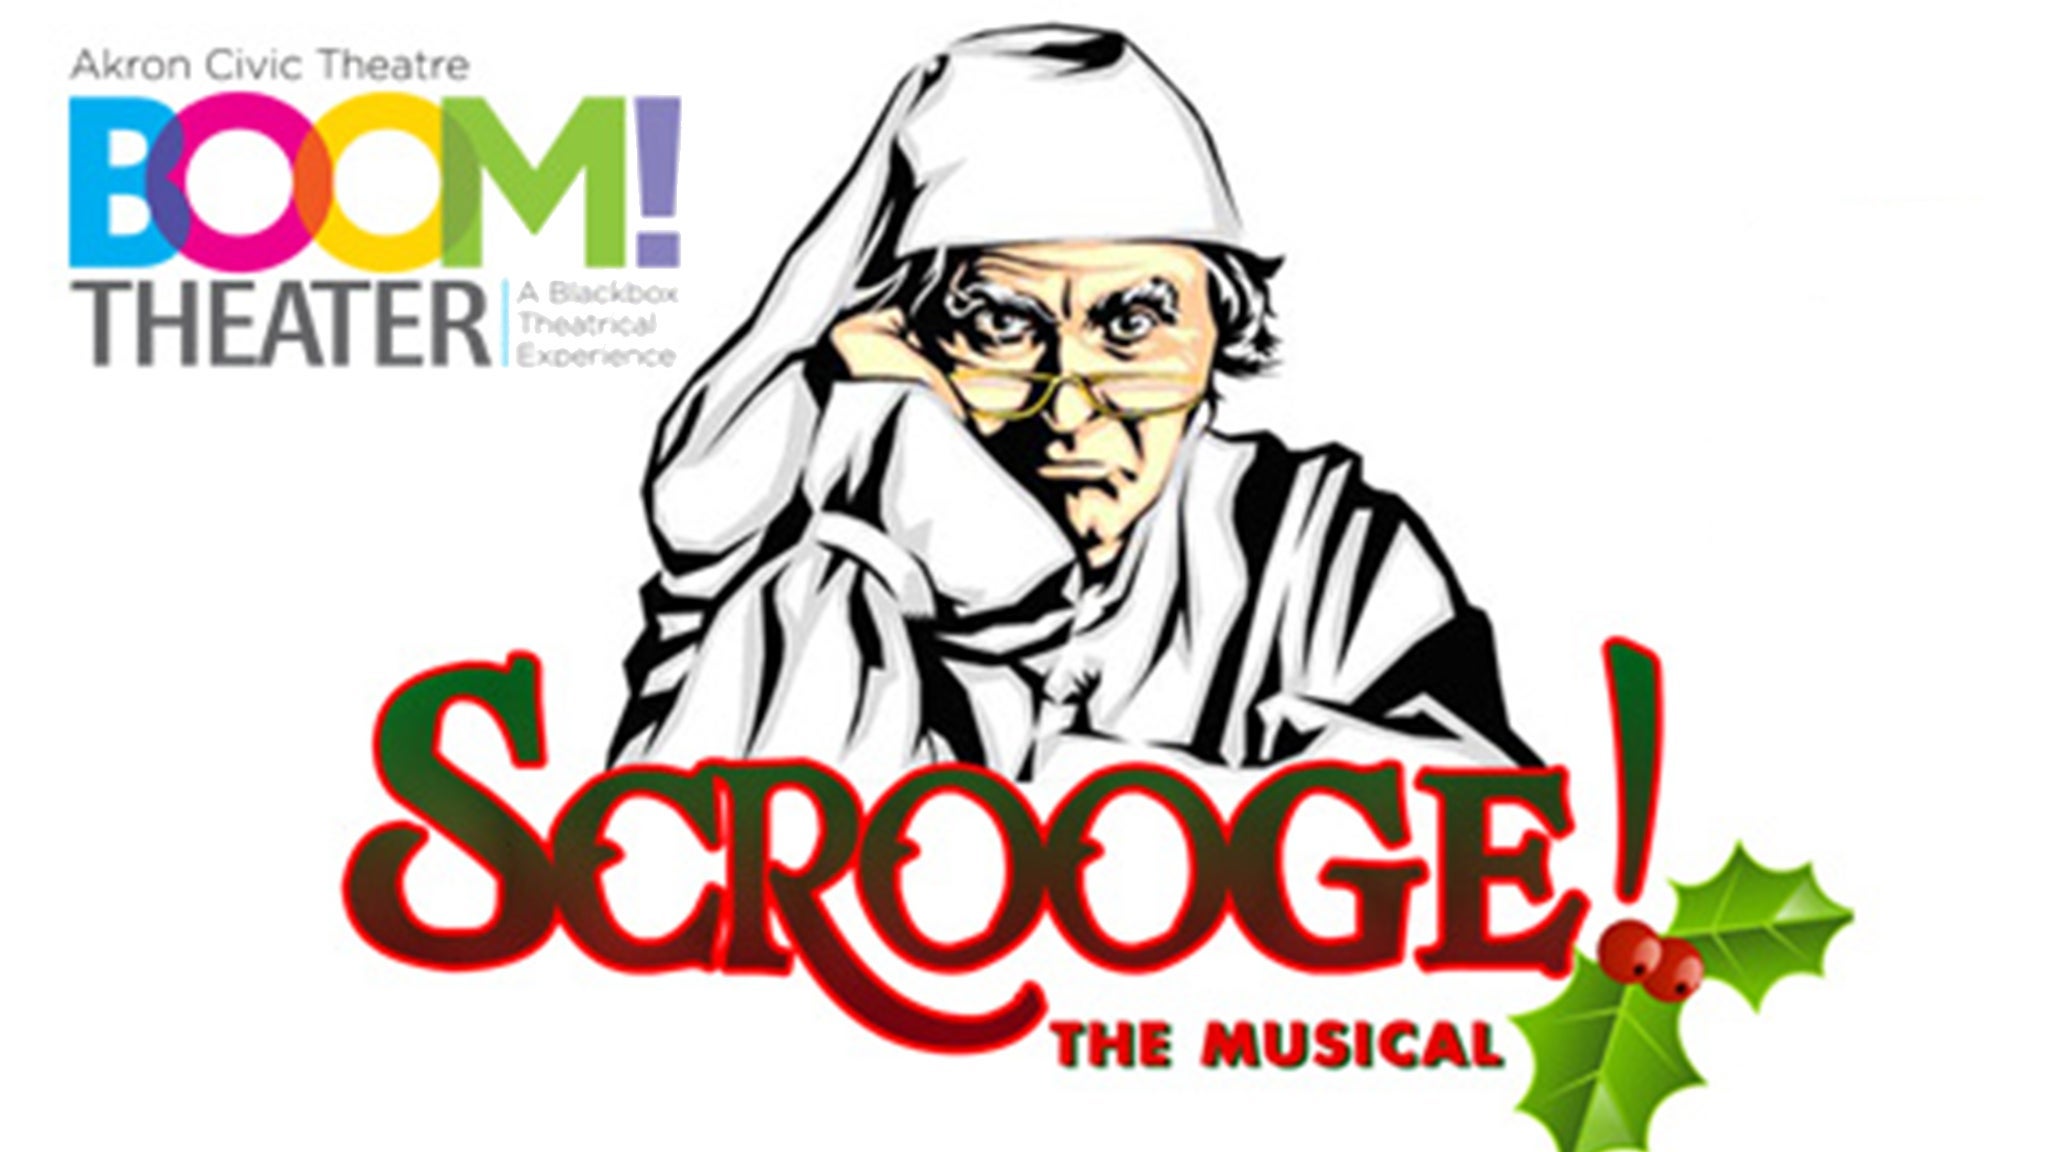 BOOM! Theater Presents: Scrooge